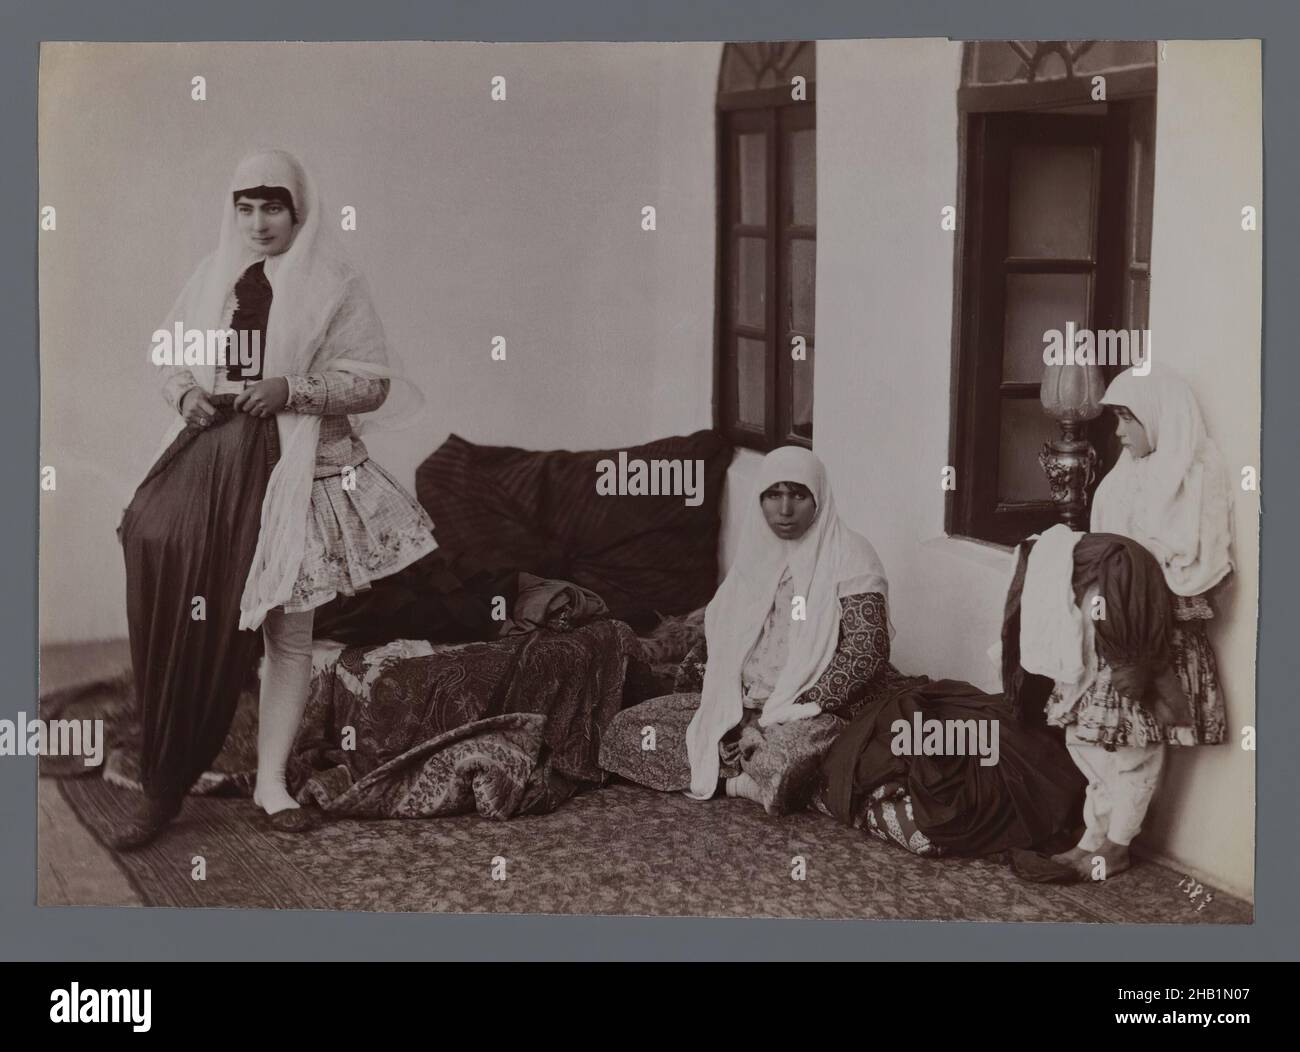 One of 274 Vintage Photographs, Albumen silver photograph, late 19th-early 20th century, Qajar, Qajar Period, 5 7/8 x 8 3/16 in., 14.9 x 20.8 cm, child, family, harem, hijab, historical fashion, Iran, mother, Persia, persian rug Stock Photo